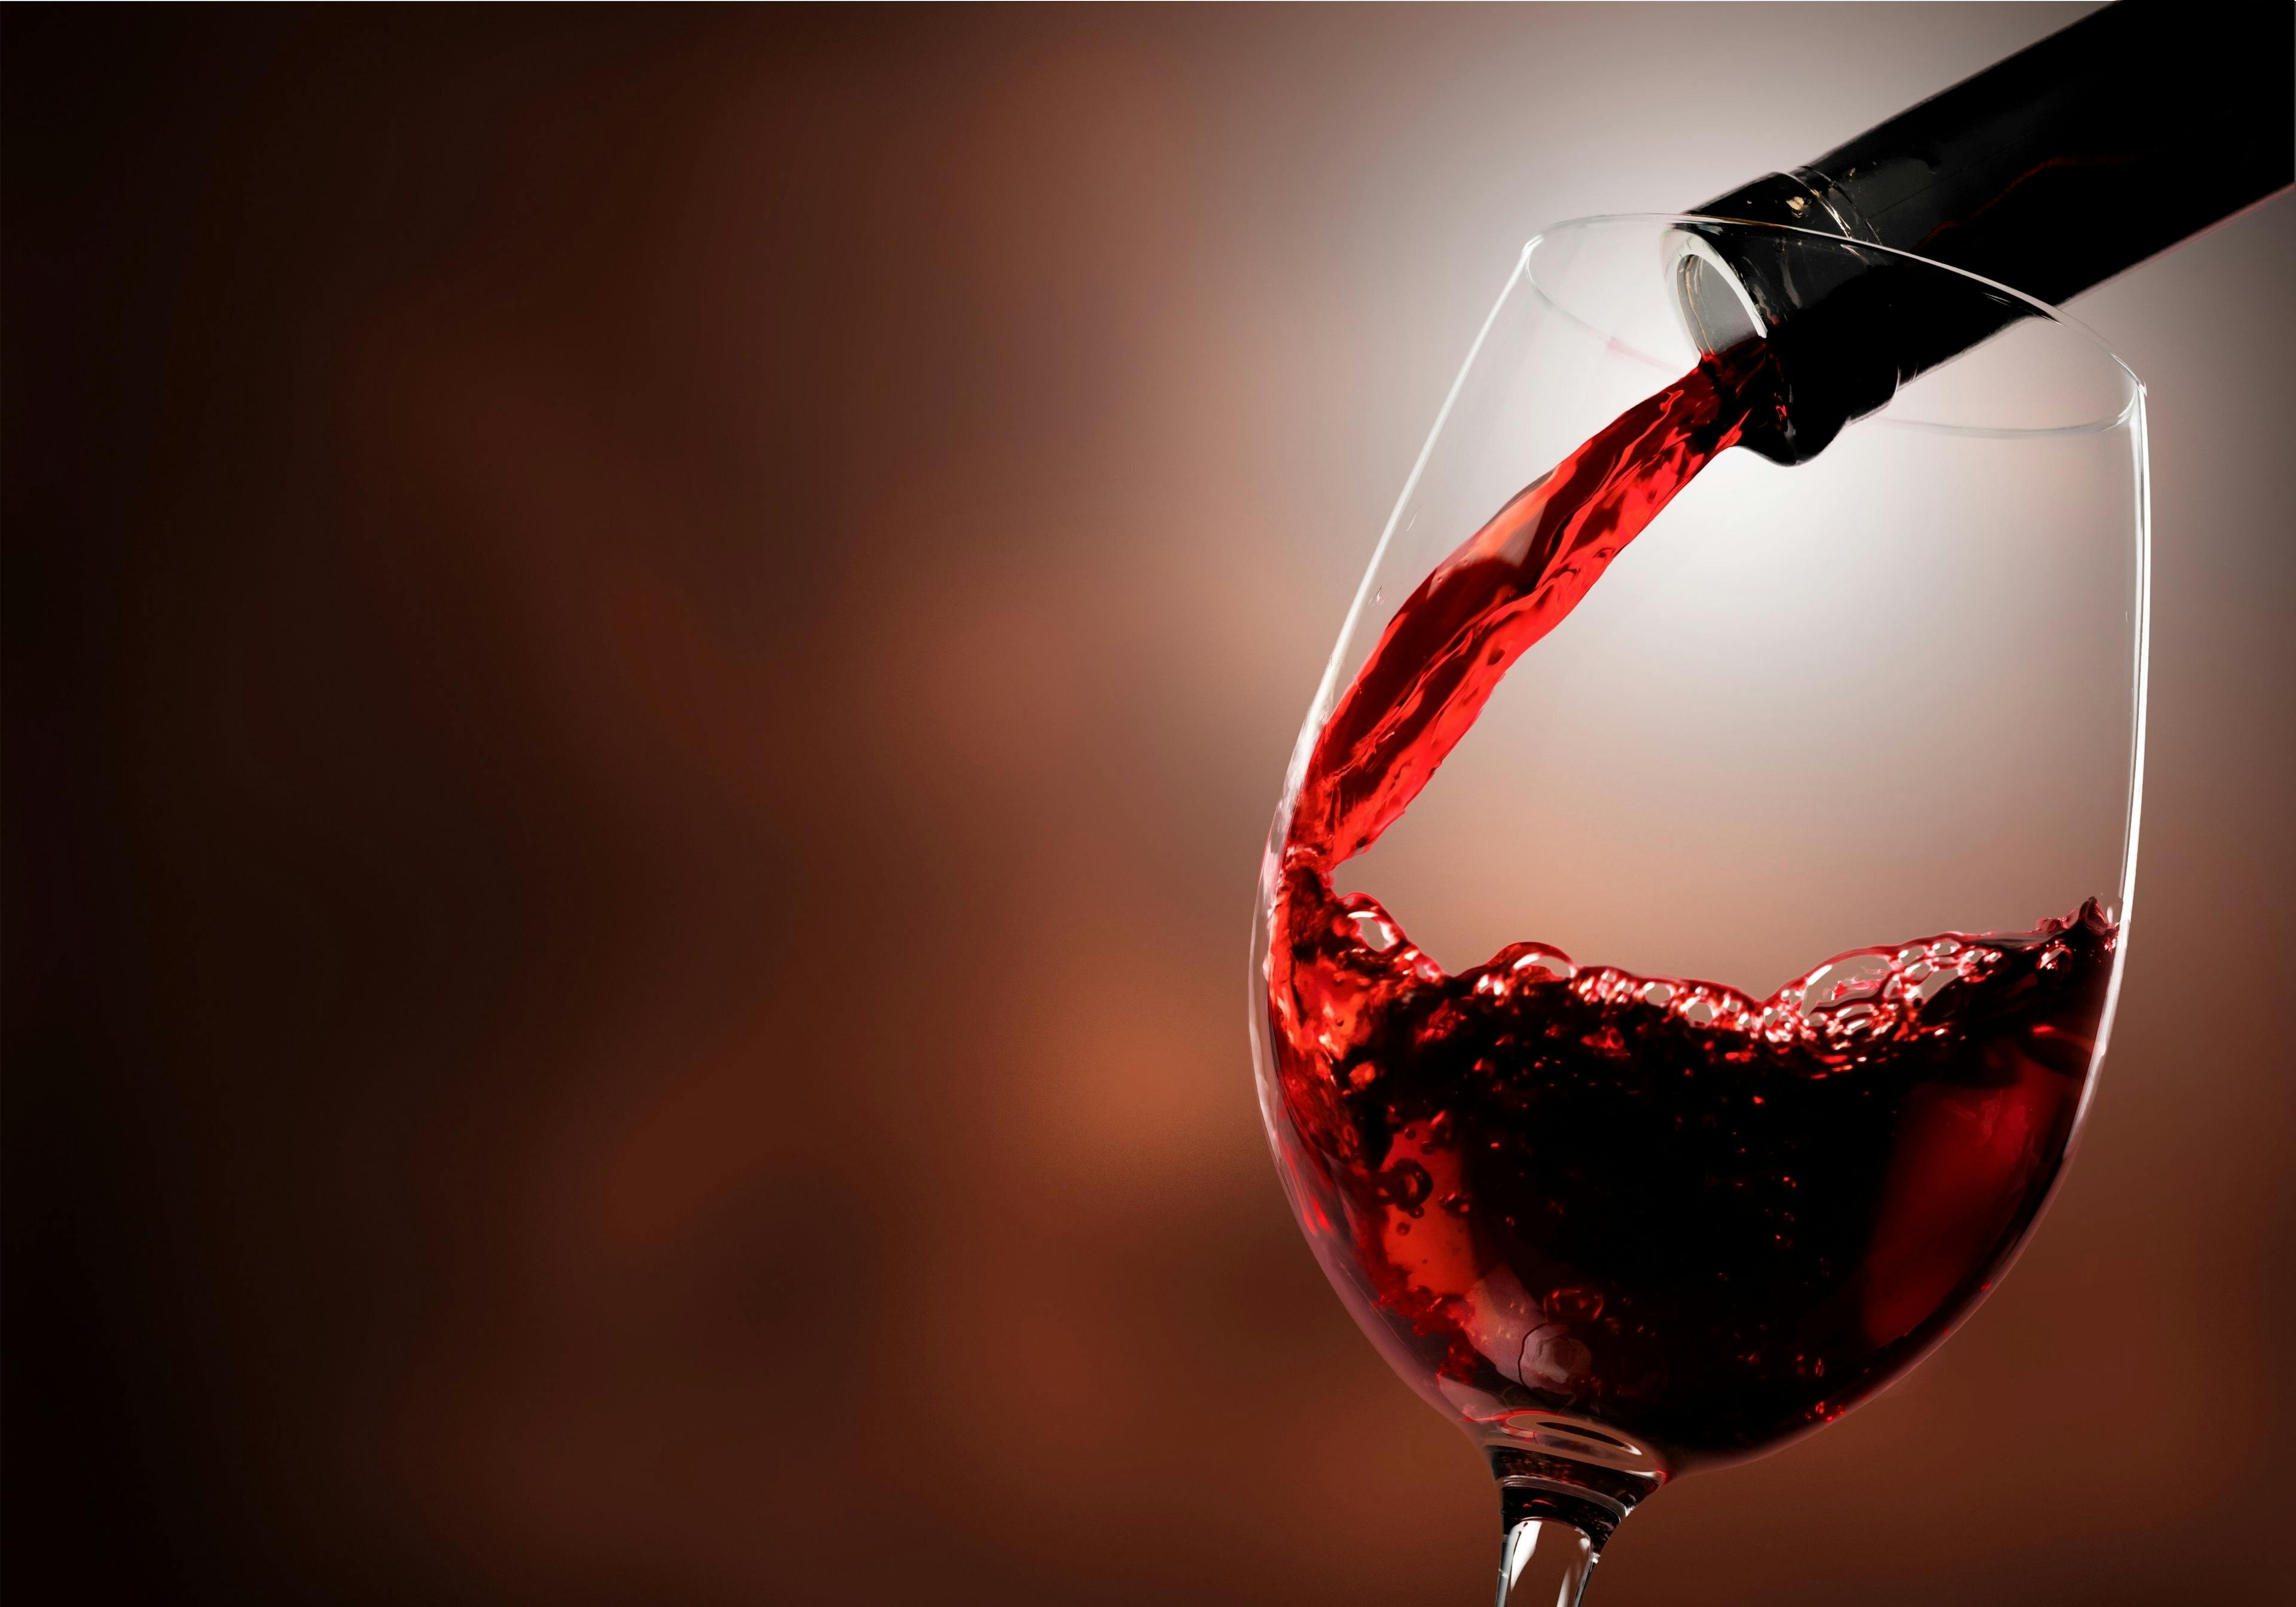 Red wine pouring in glass on background | Image Credit: © BillionPhotos.com - stock.adobe.com